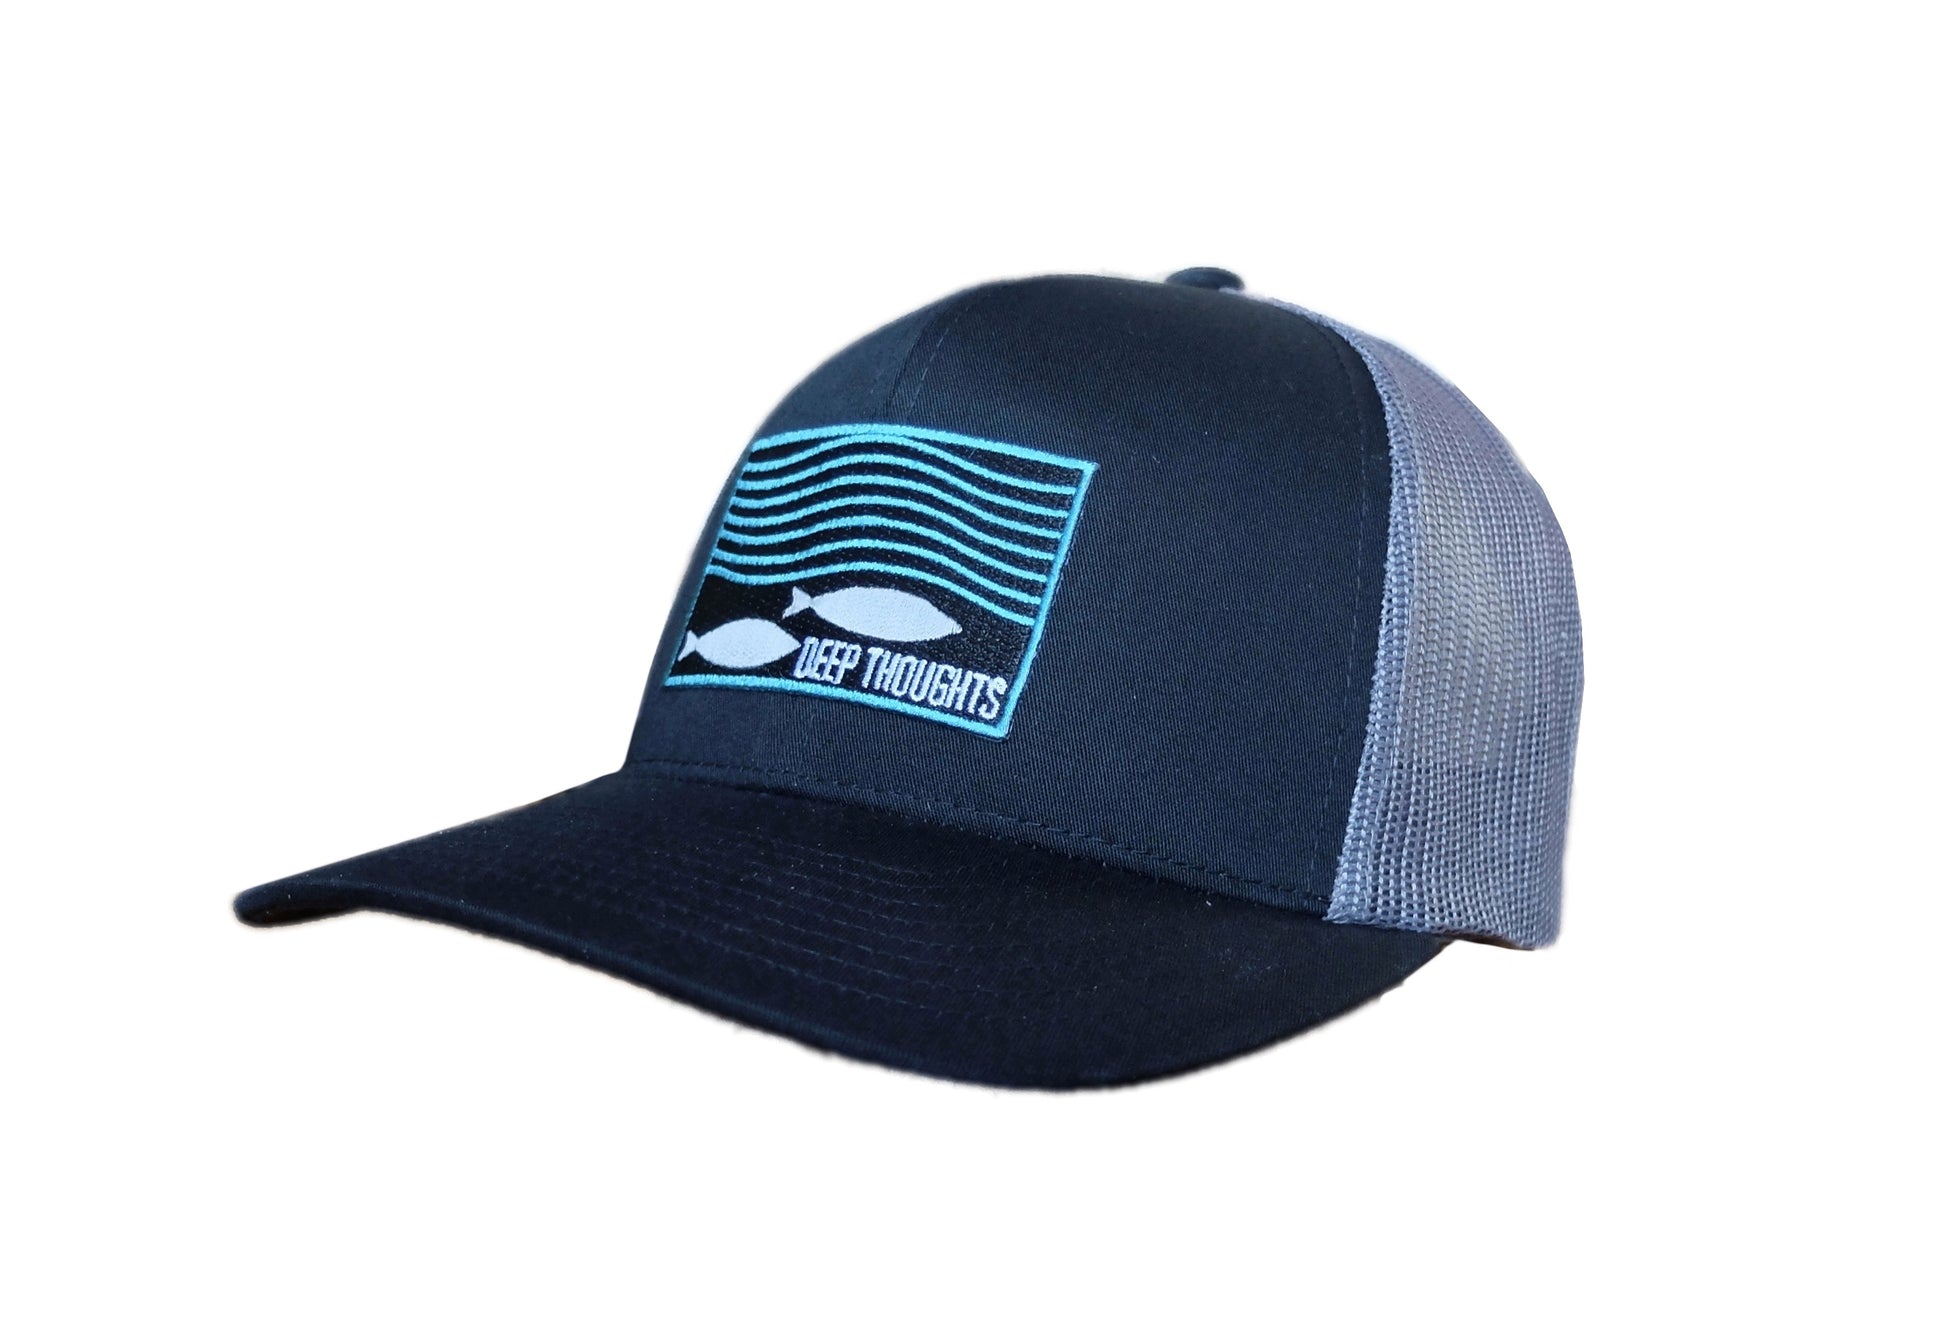 black and charcoal structured trucker hat with rectangular embroidered patch showing fish under wavy ocean currents